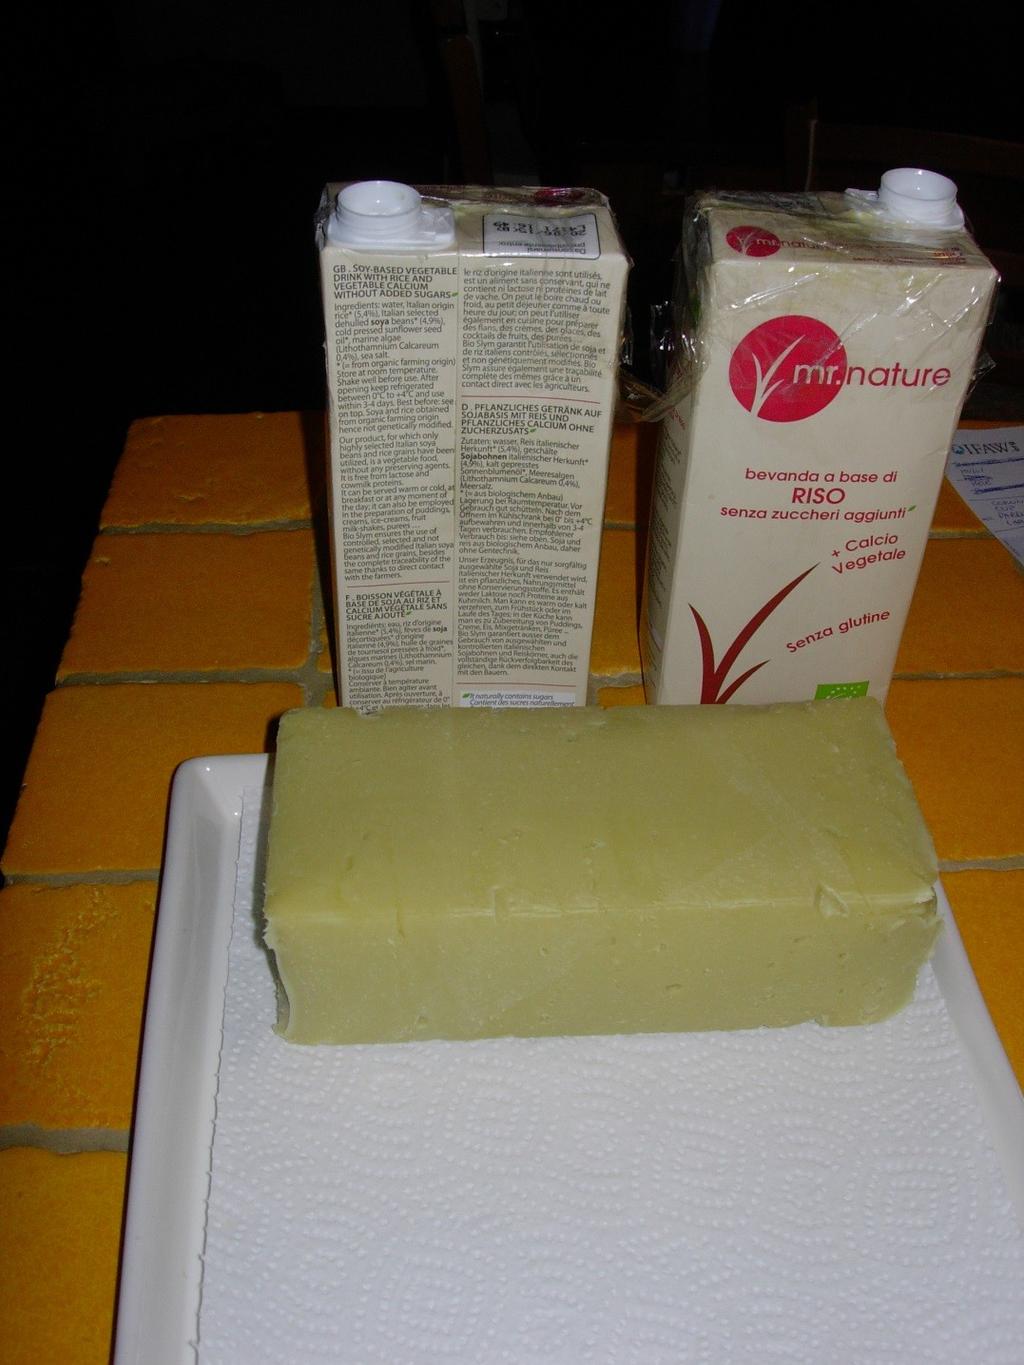 The soap, after 48 hours, is extracted from the tetrapack. It has a solid consistency and is greasy to the touch. It should be placed on paper towels.